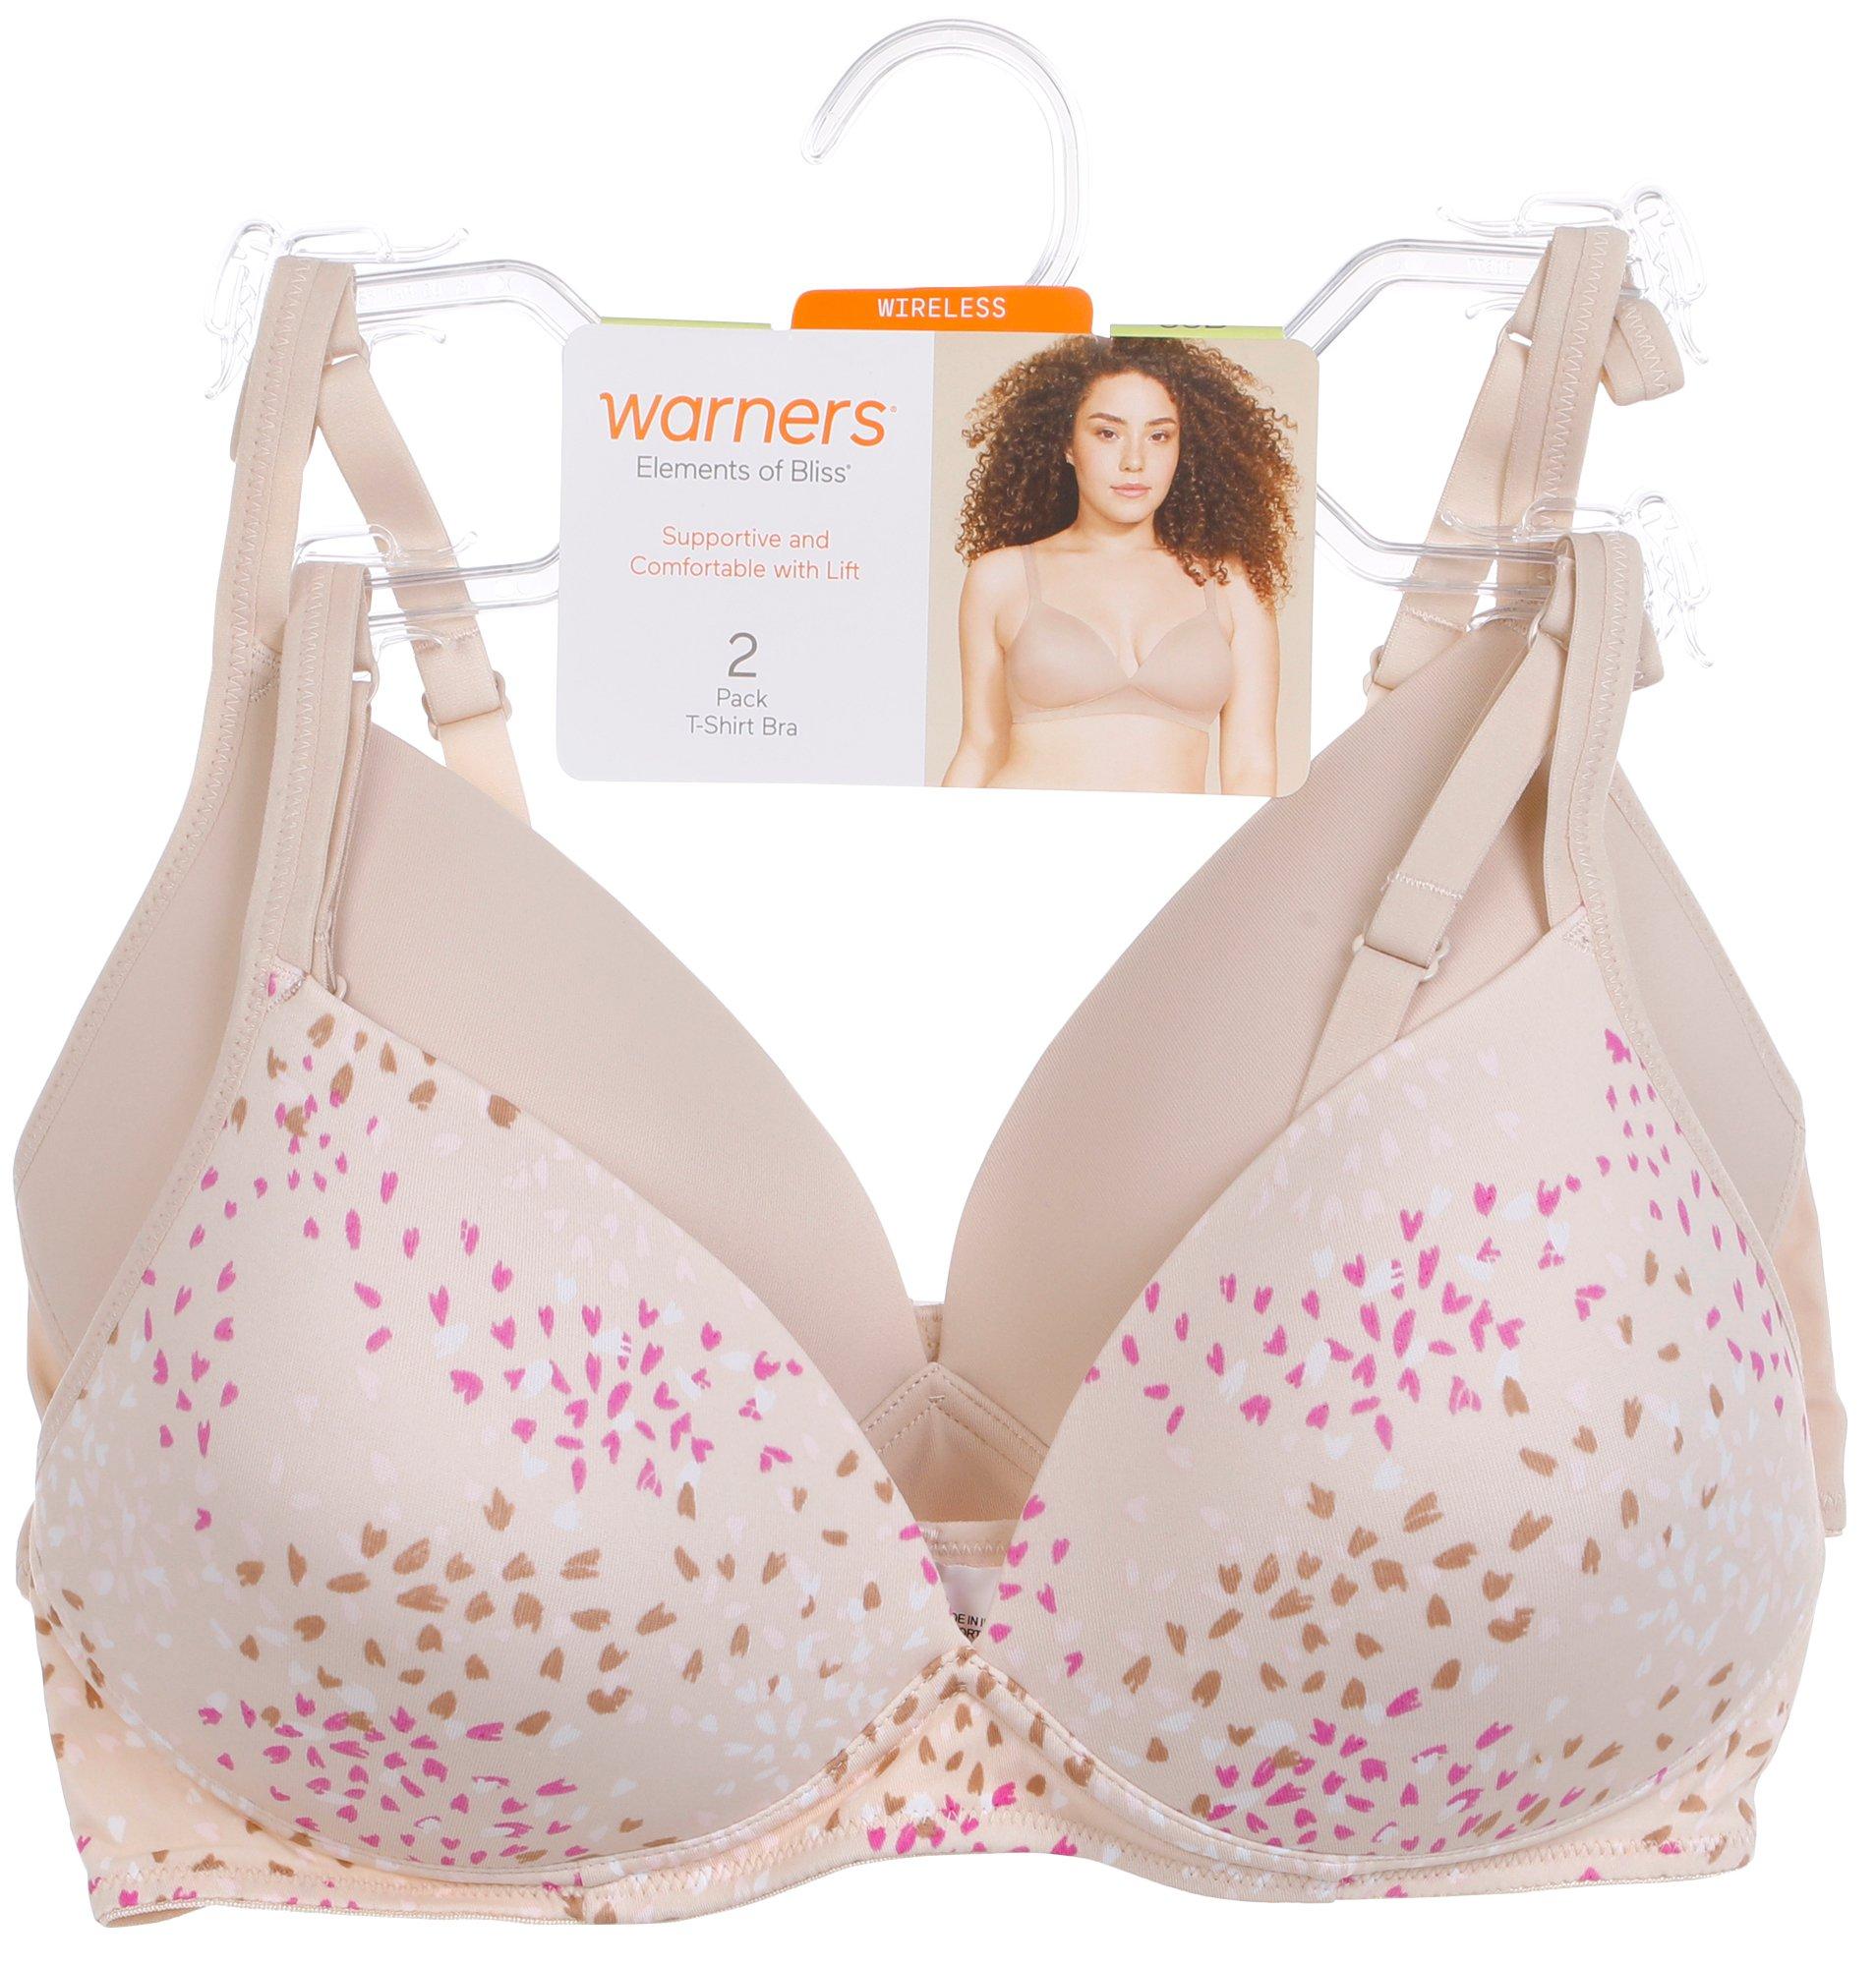 BLS - Nanne Non Wired And Non Padded Nursing Bra